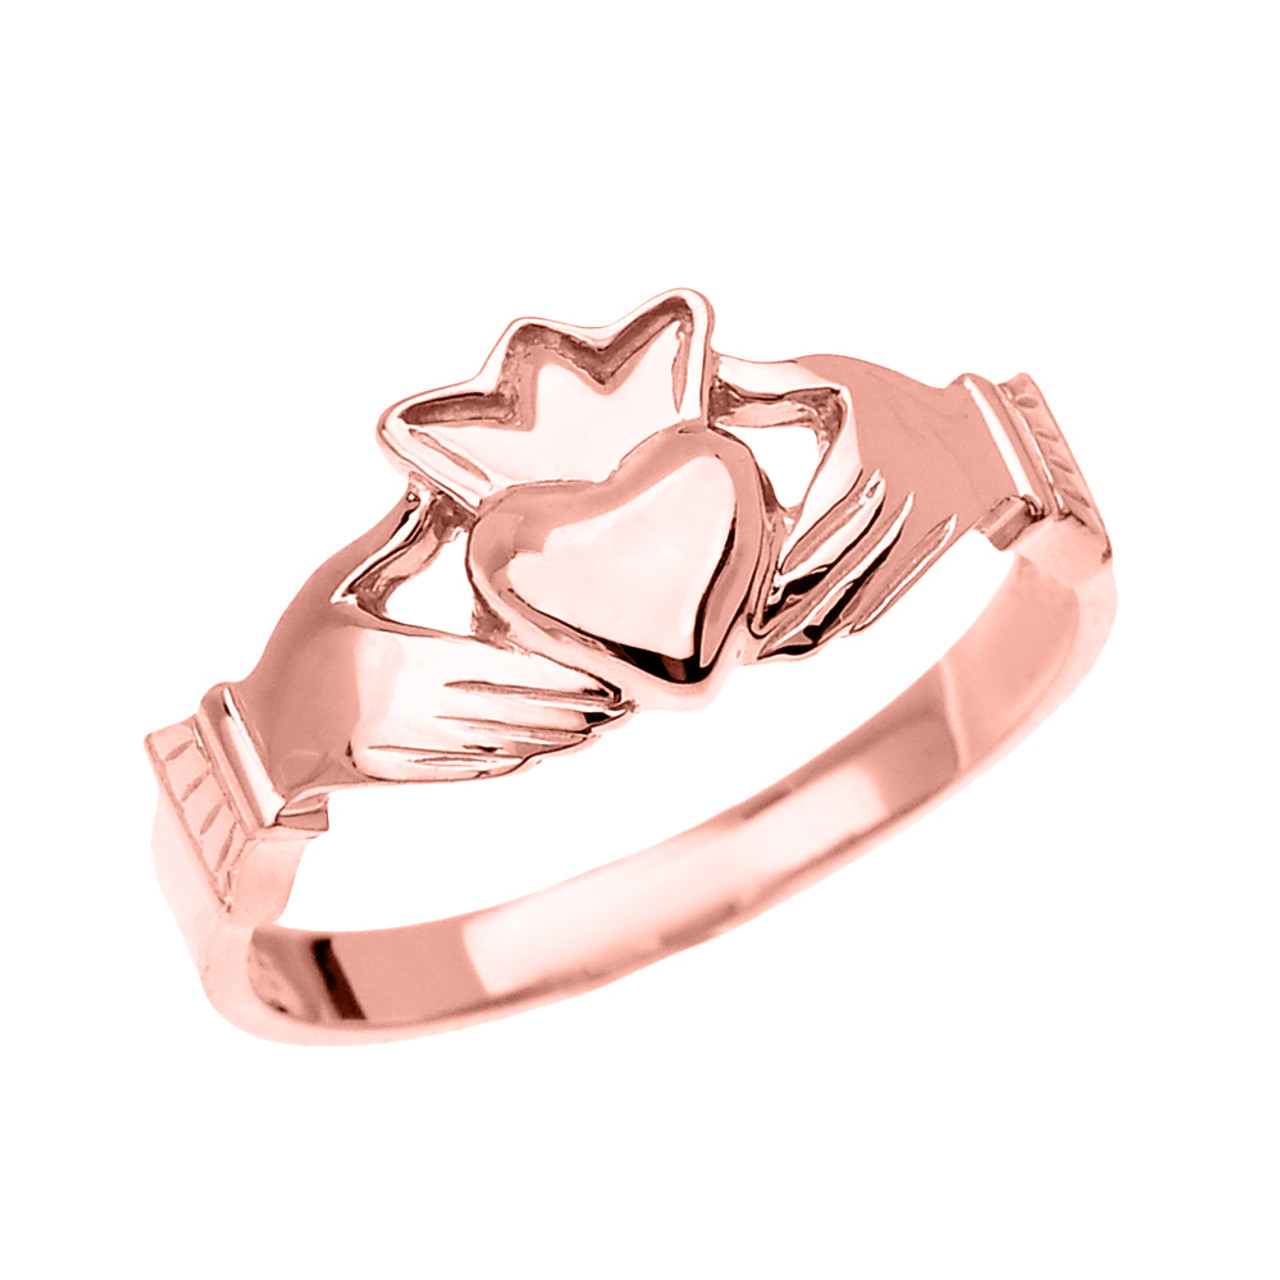 GENTS 18CT ROSE GOLD CLADDAGH RING | Claddagh Ring